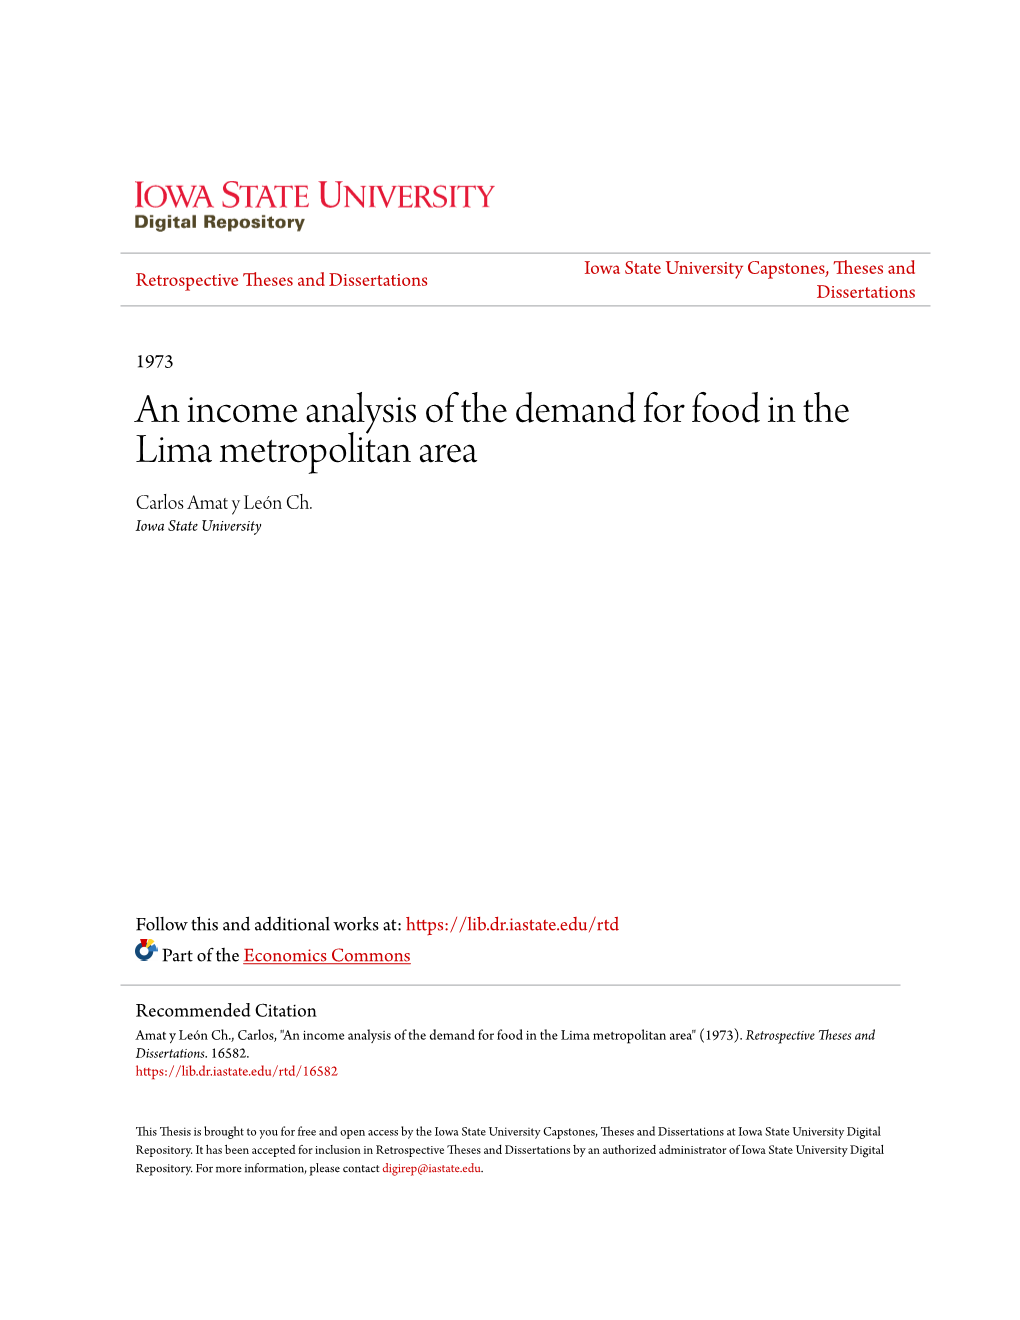 An Income Analysis of the Demand for Food in the Lima Metropolitan Area Carlos Amat Y León Ch